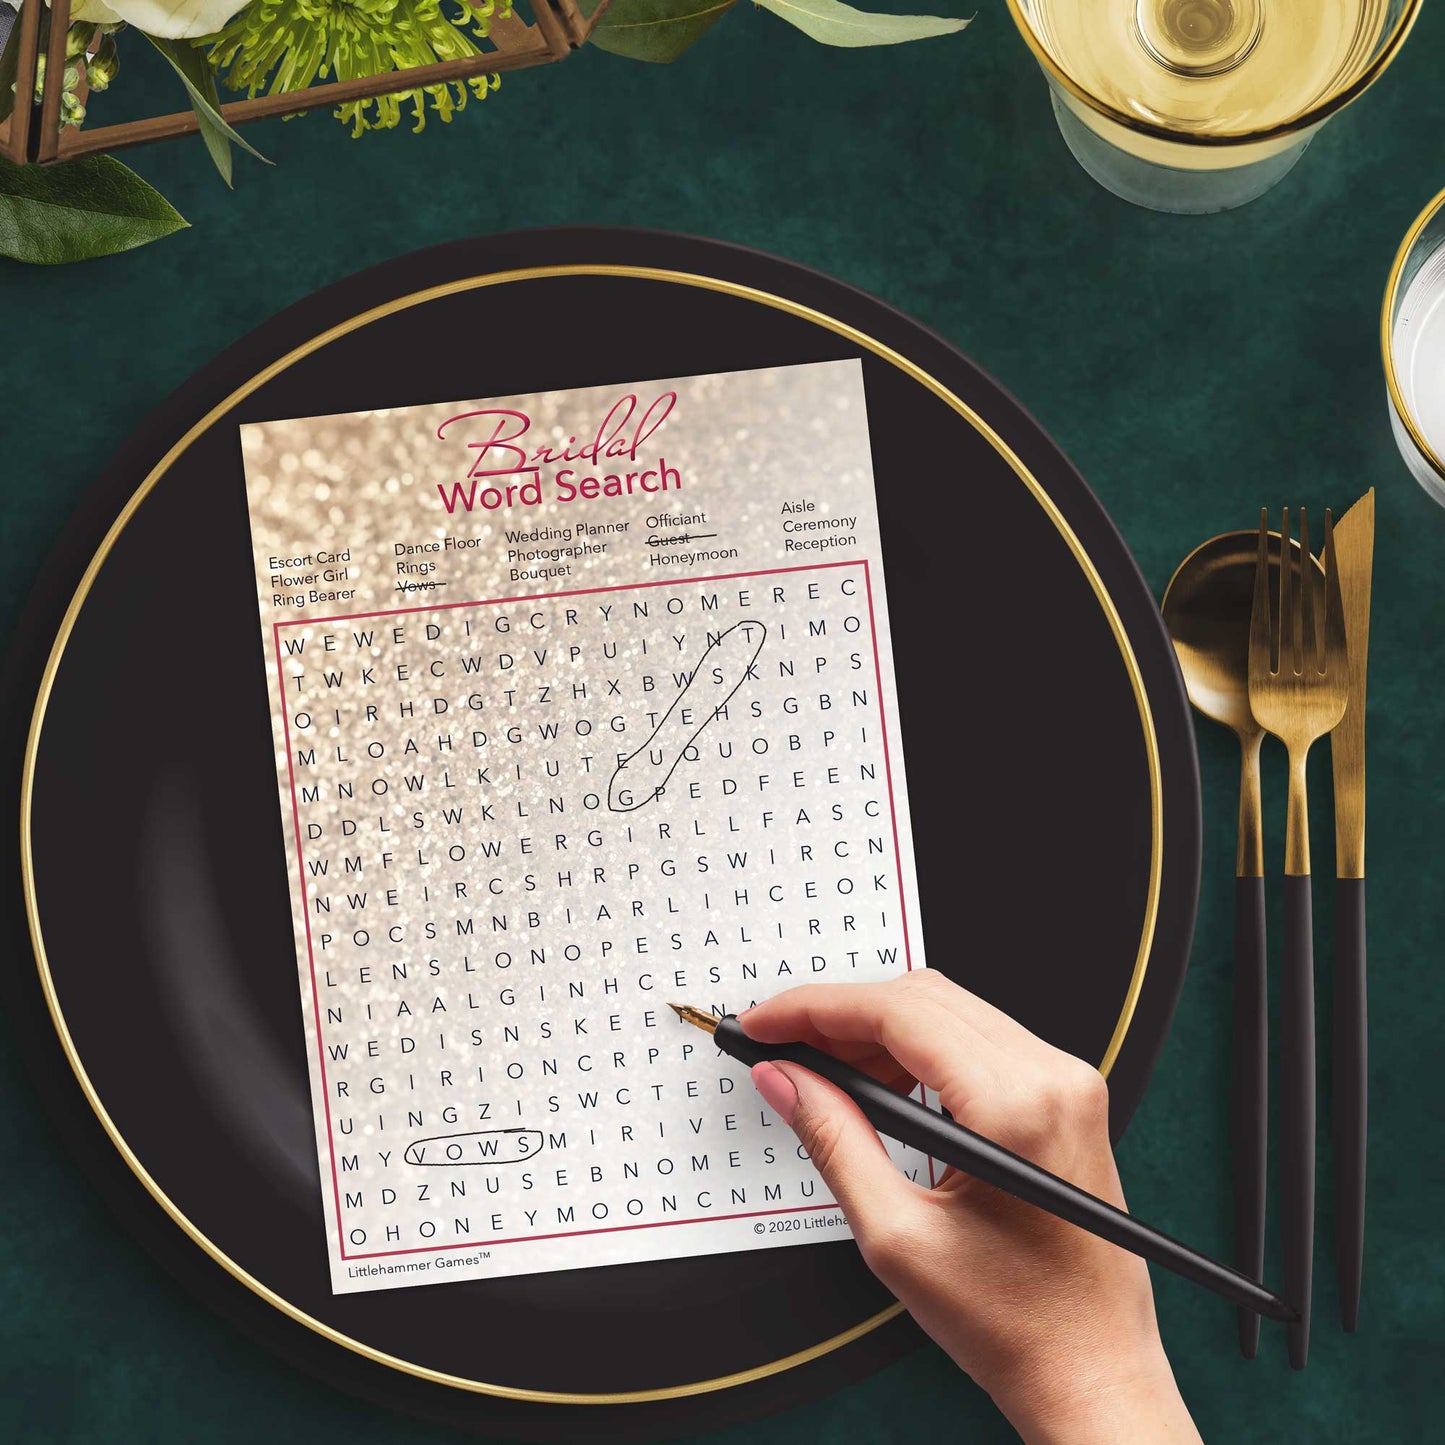 Woman with a pen playing a glittery rose gold Bridal Word Search game card at a dark place setting